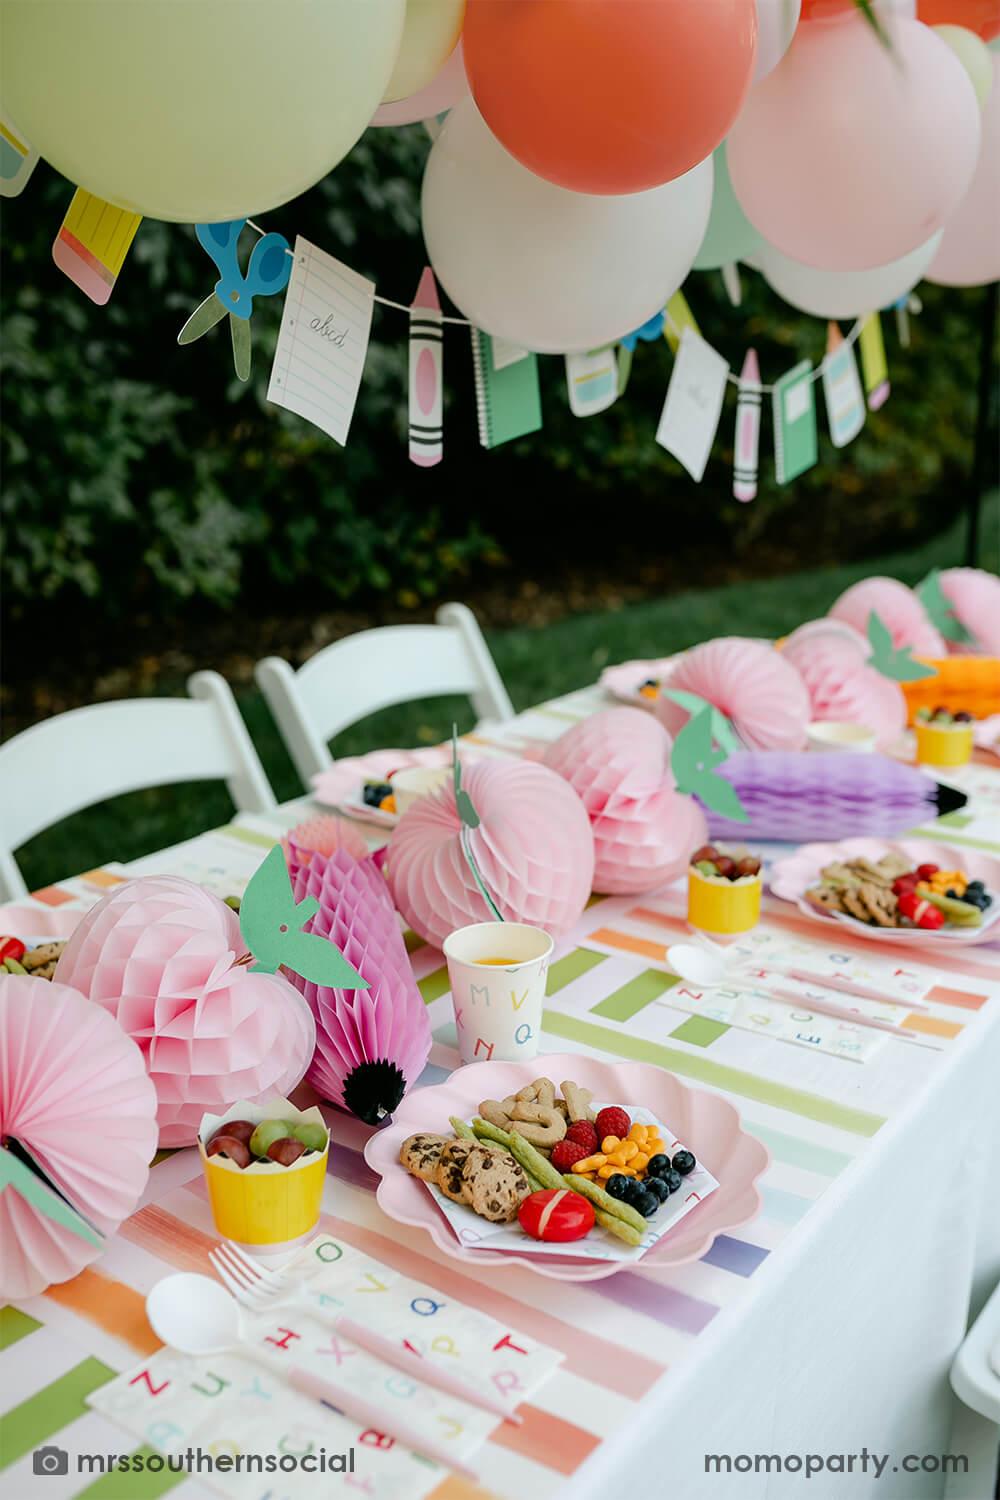 A backyard pastel themed back to school party table set up and decoration featuring Momo Party's back to school themed party goods including back to school party garland, pink apple honeycombs and rainbow pastel pencil honeycombs as the centerpiece, ABC alphabet plates, party cups and napkins. With kids snacks including ABC alphabet crackers, fruits, cheese, it gives great ideas and inspo for celebrating kid's first day of school.